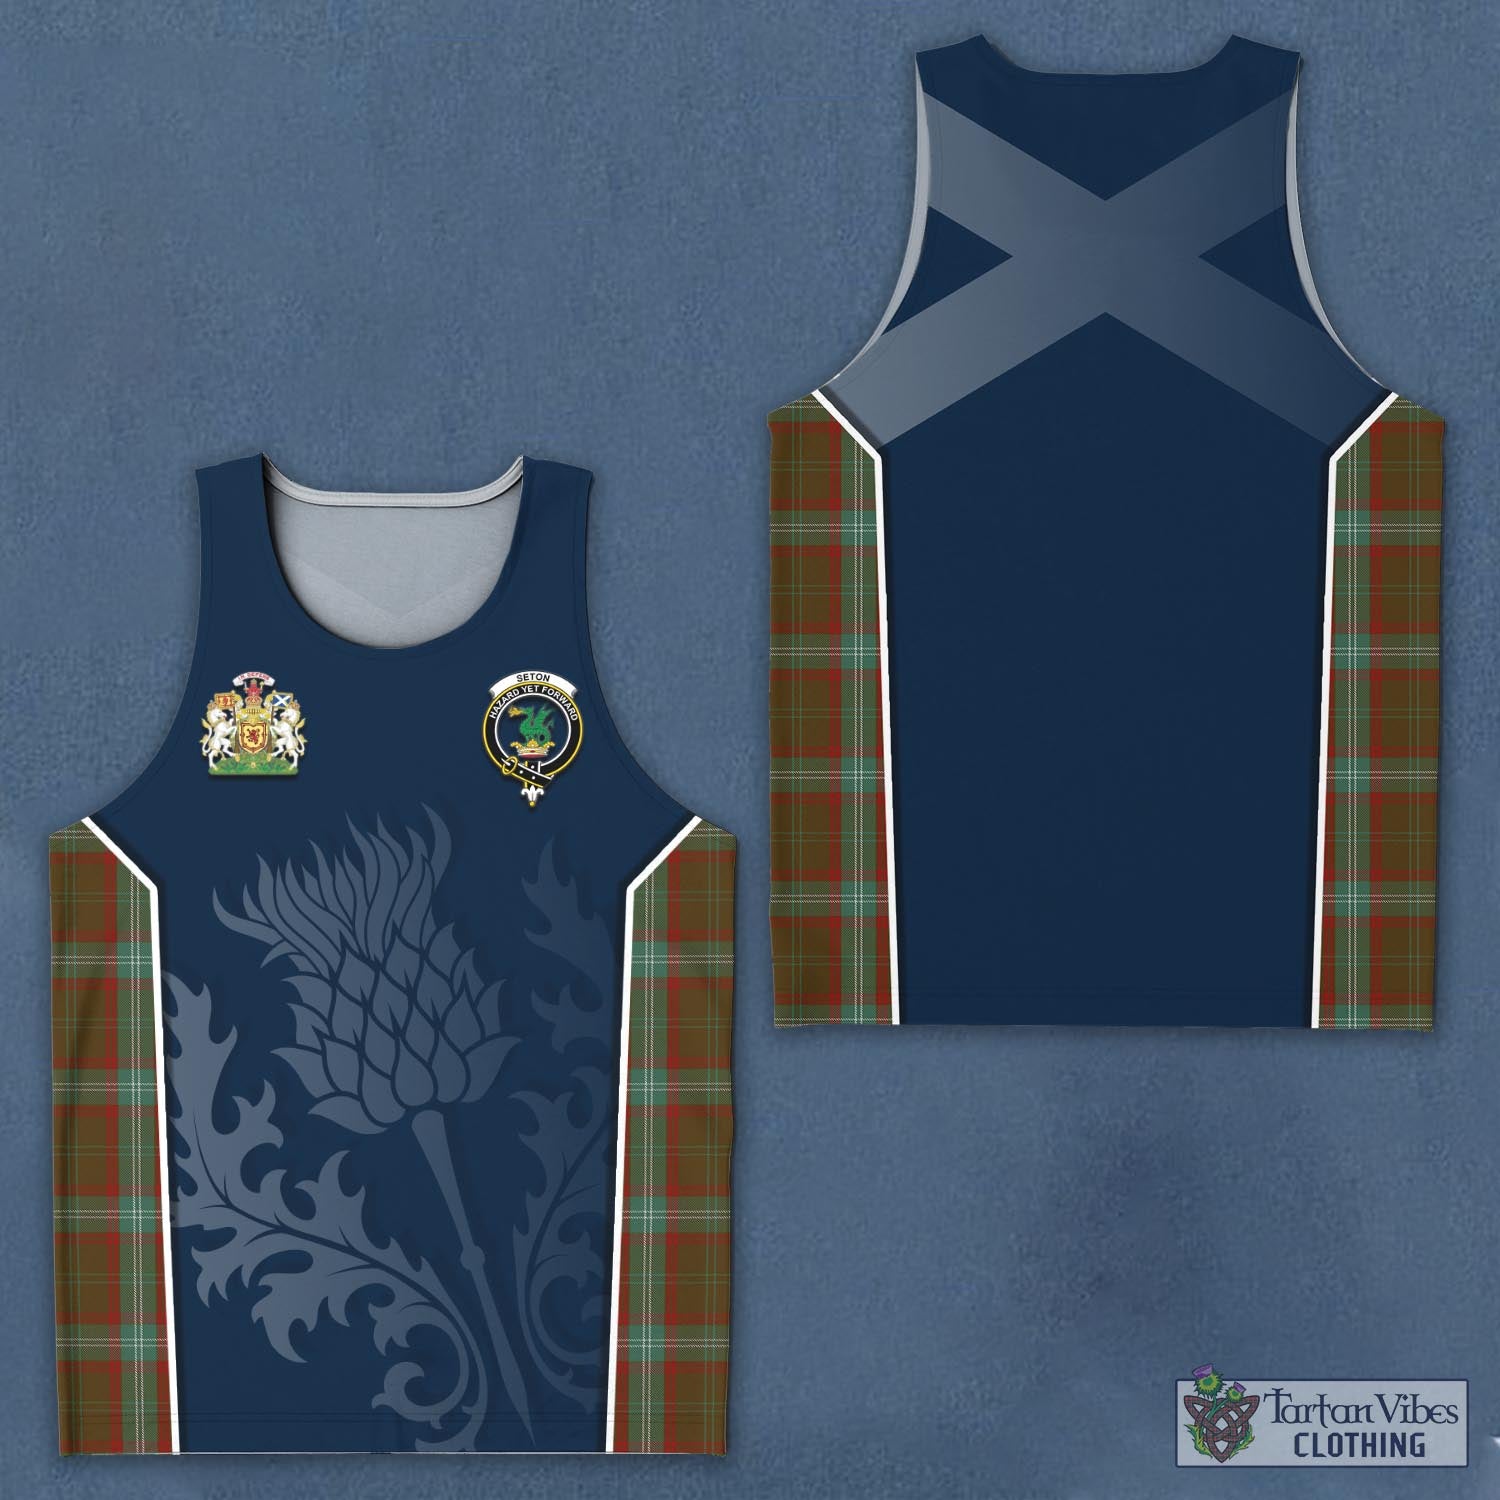 Tartan Vibes Clothing Seton Hunting Tartan Men's Tanks Top with Family Crest and Scottish Thistle Vibes Sport Style